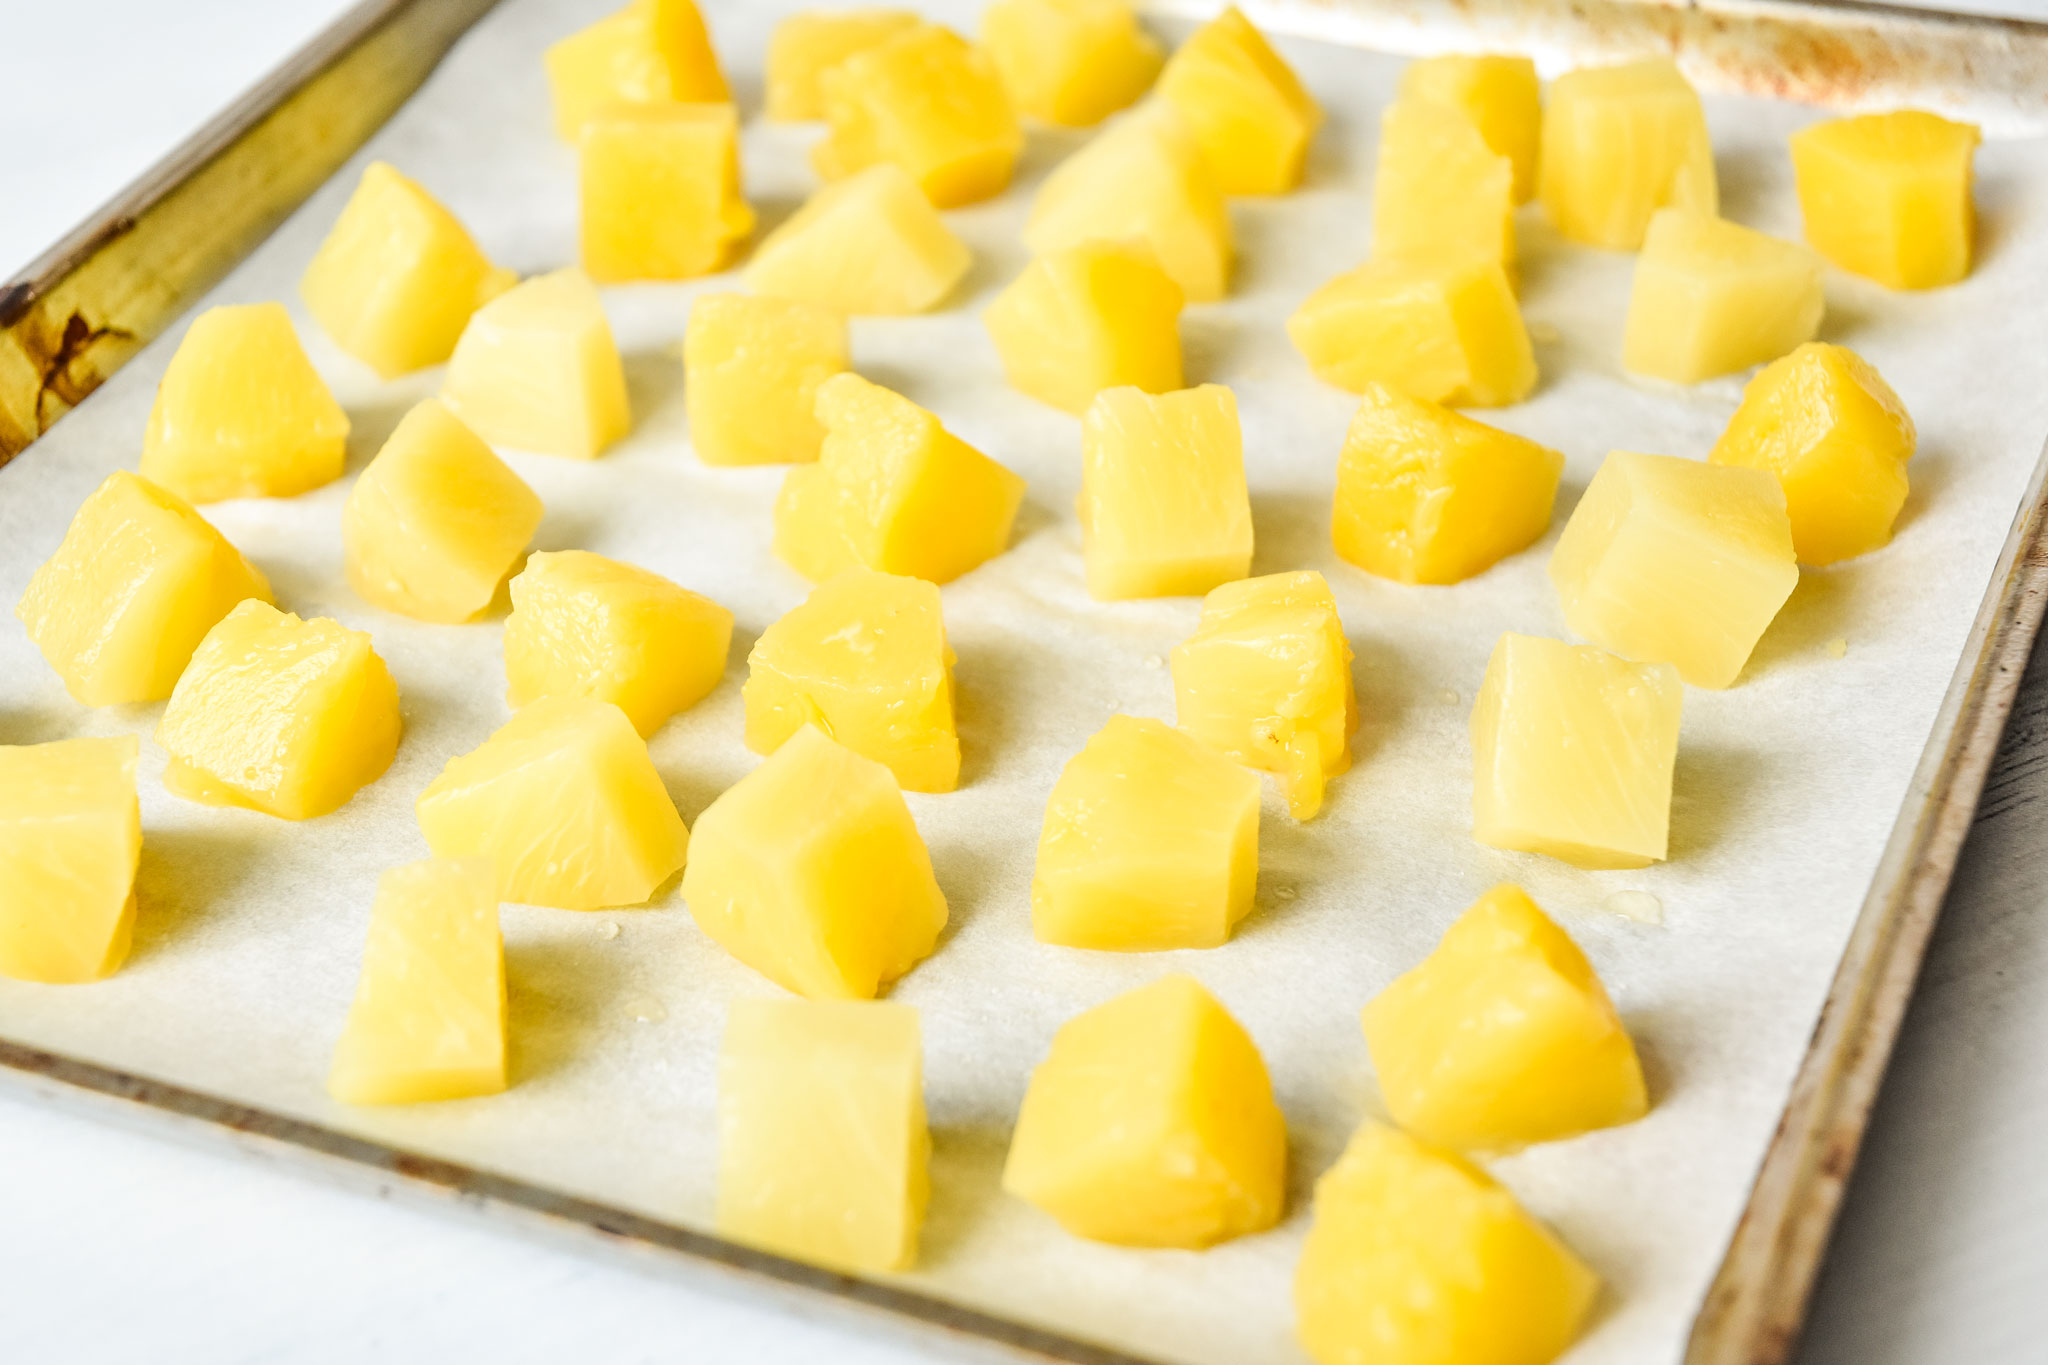 sheet pan of pineapple chunks to be frozen for summer white wine sangria